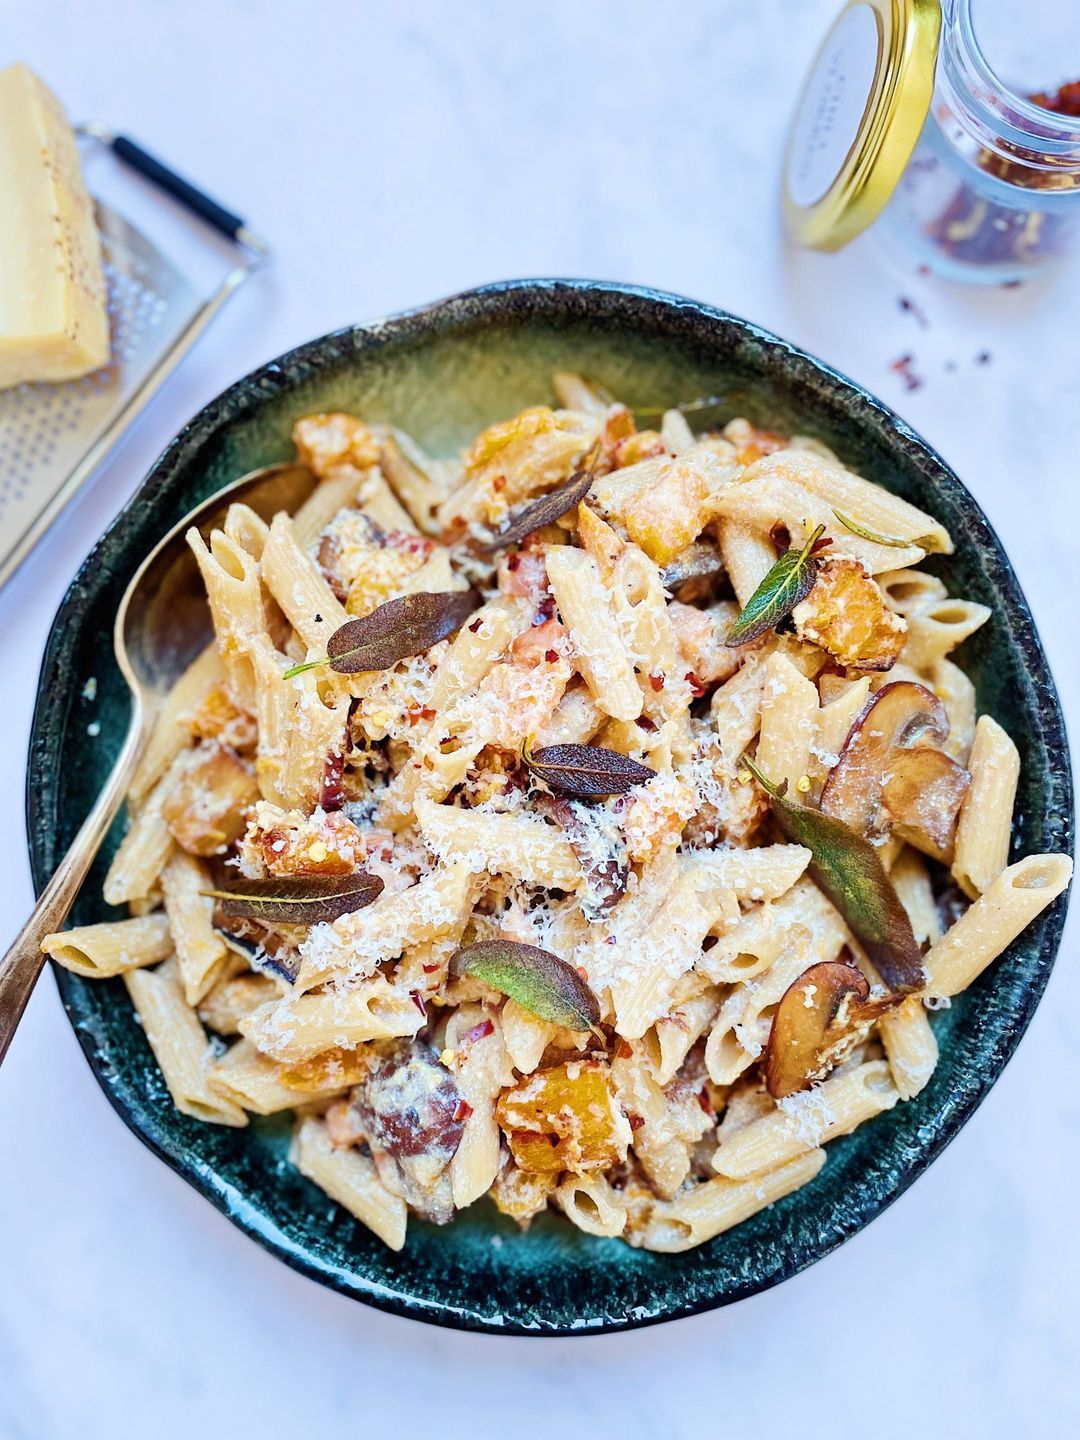 Pumpkin, mushrooms and ricotta pasta with bacon and fried sage